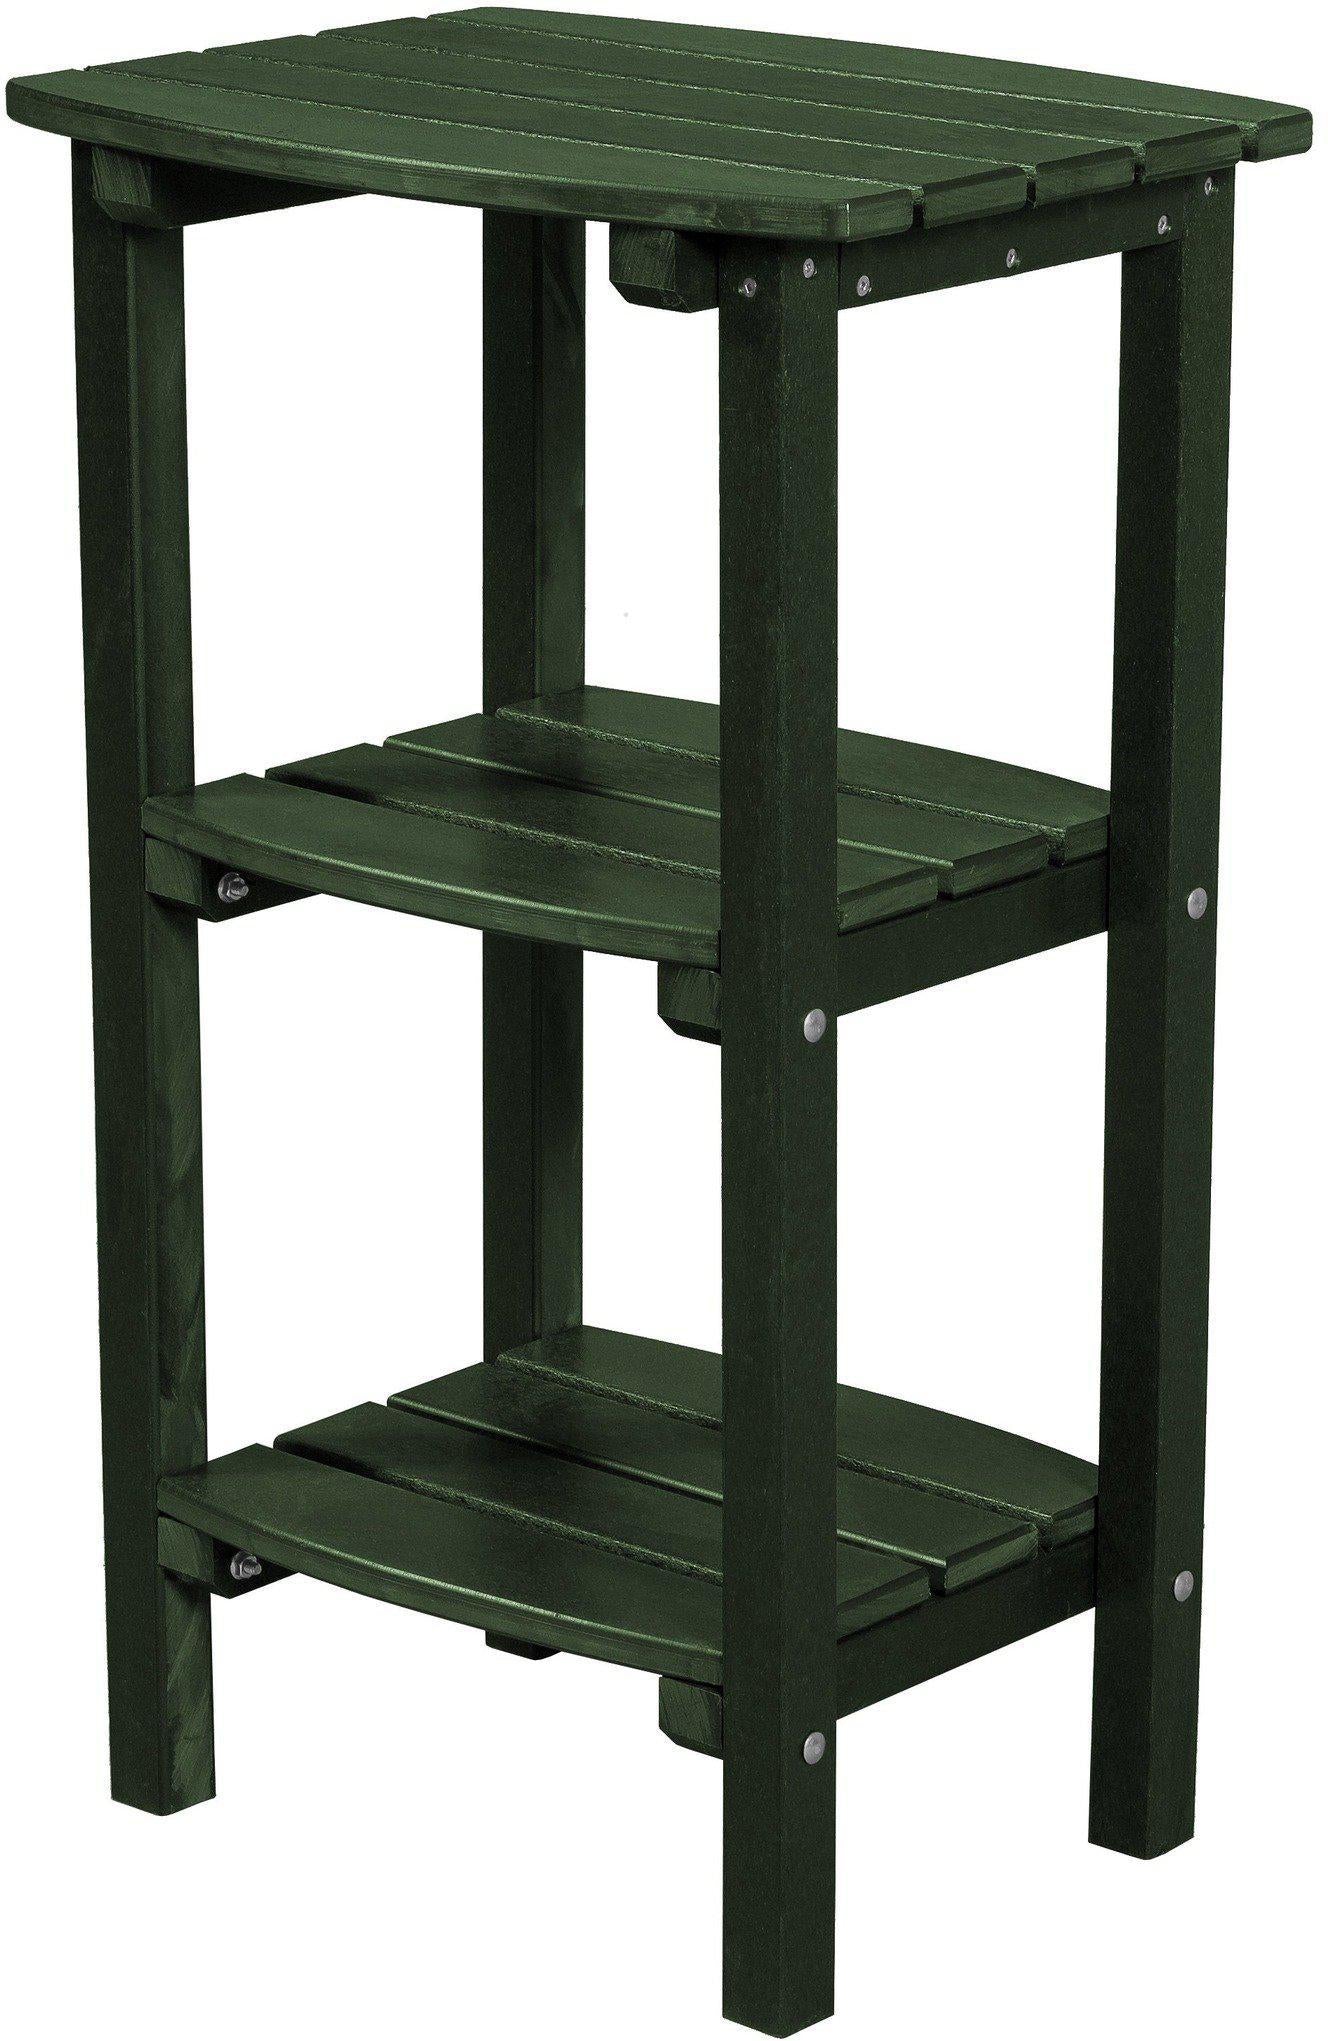 Wildridge Recycled Plastic LCC-221 Classic 3 Shelf Side Table (COUNTER HEIGHT) - LEAD TIME TO SHIP 6 WEEKS OR LESS